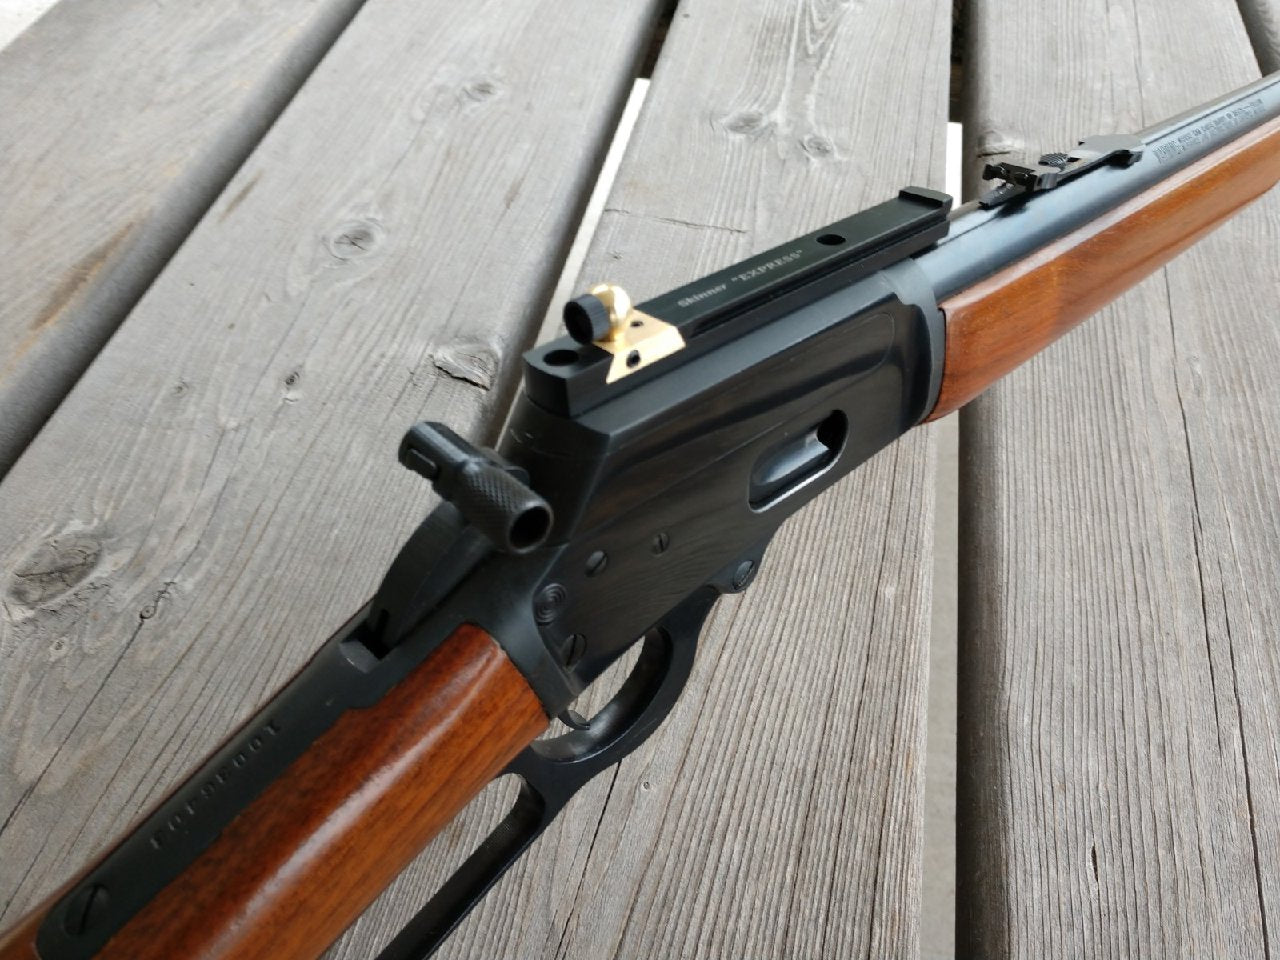 Marlin 1894 "EXPRESS" Sight with Scope Mount